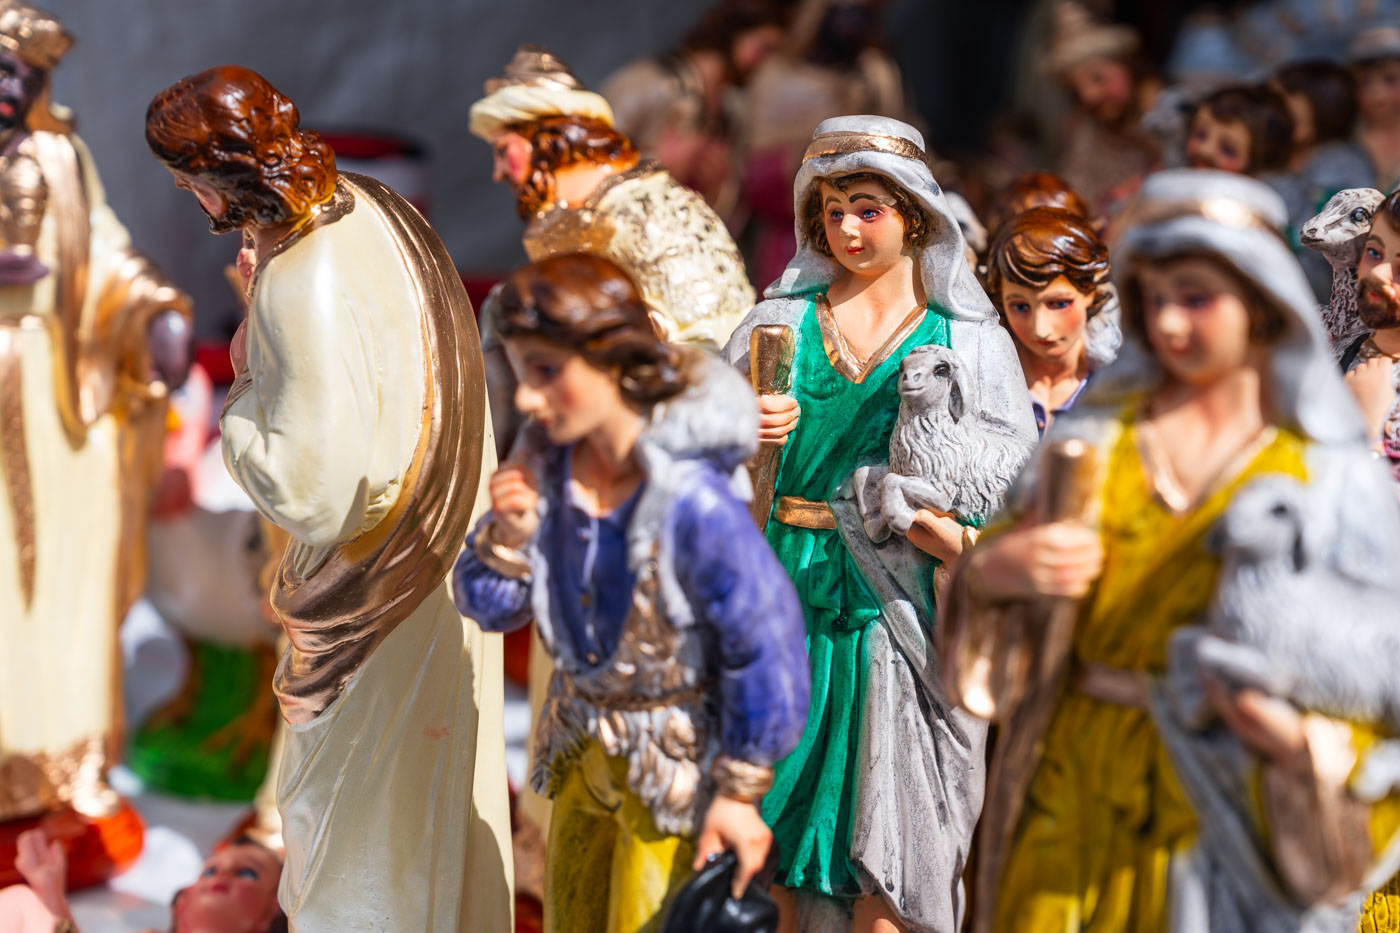 A creative photo of figures of saints for sale in a Christmas market in Cusco.